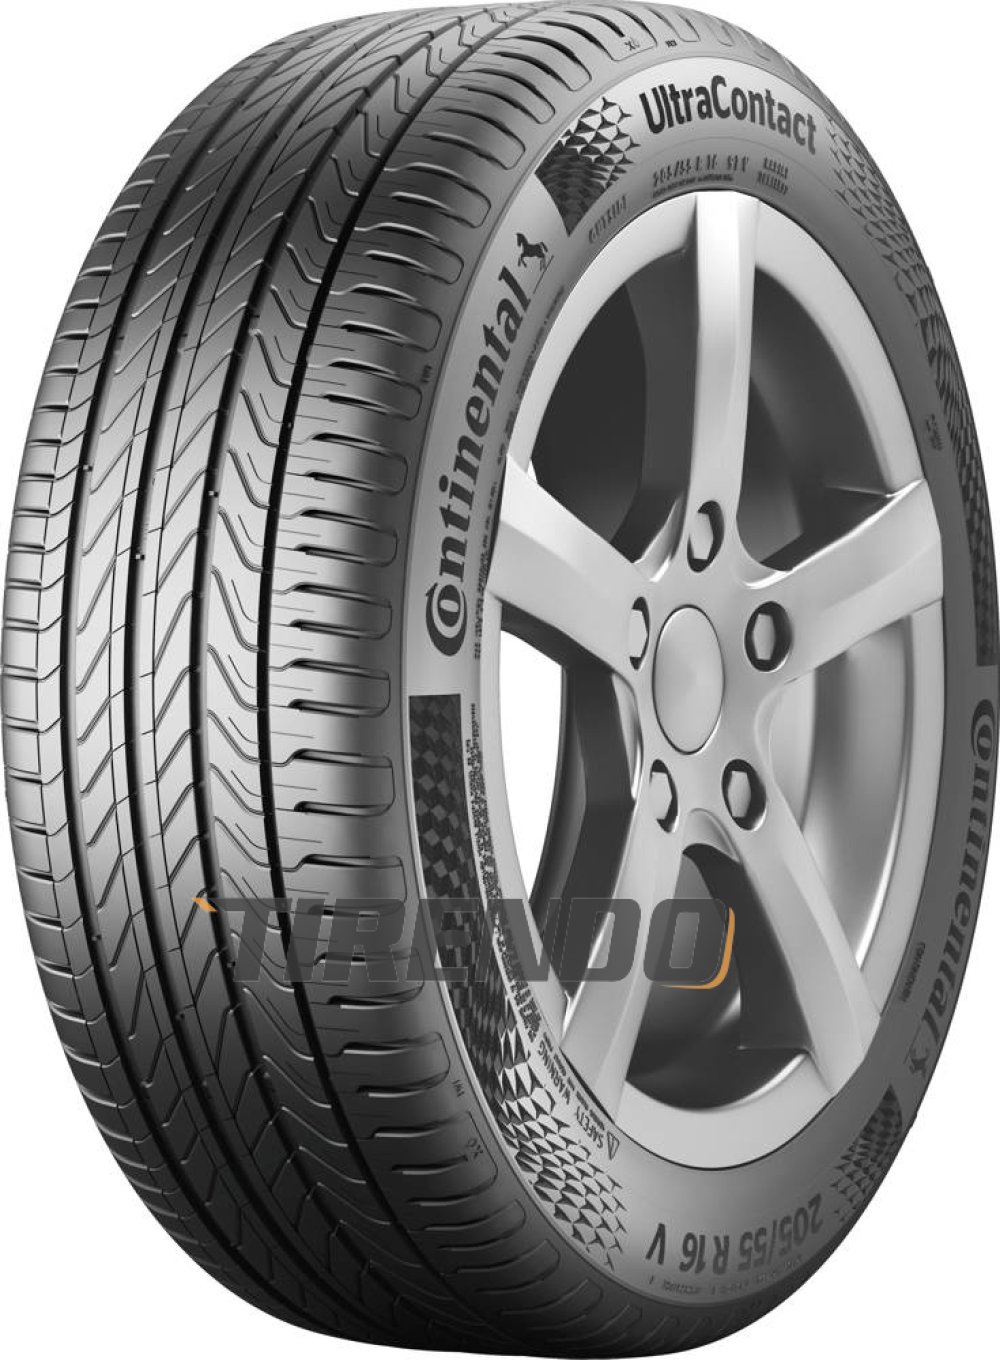 Image of Continental UltraContact ( 205/60 R16 96V XL EVc )